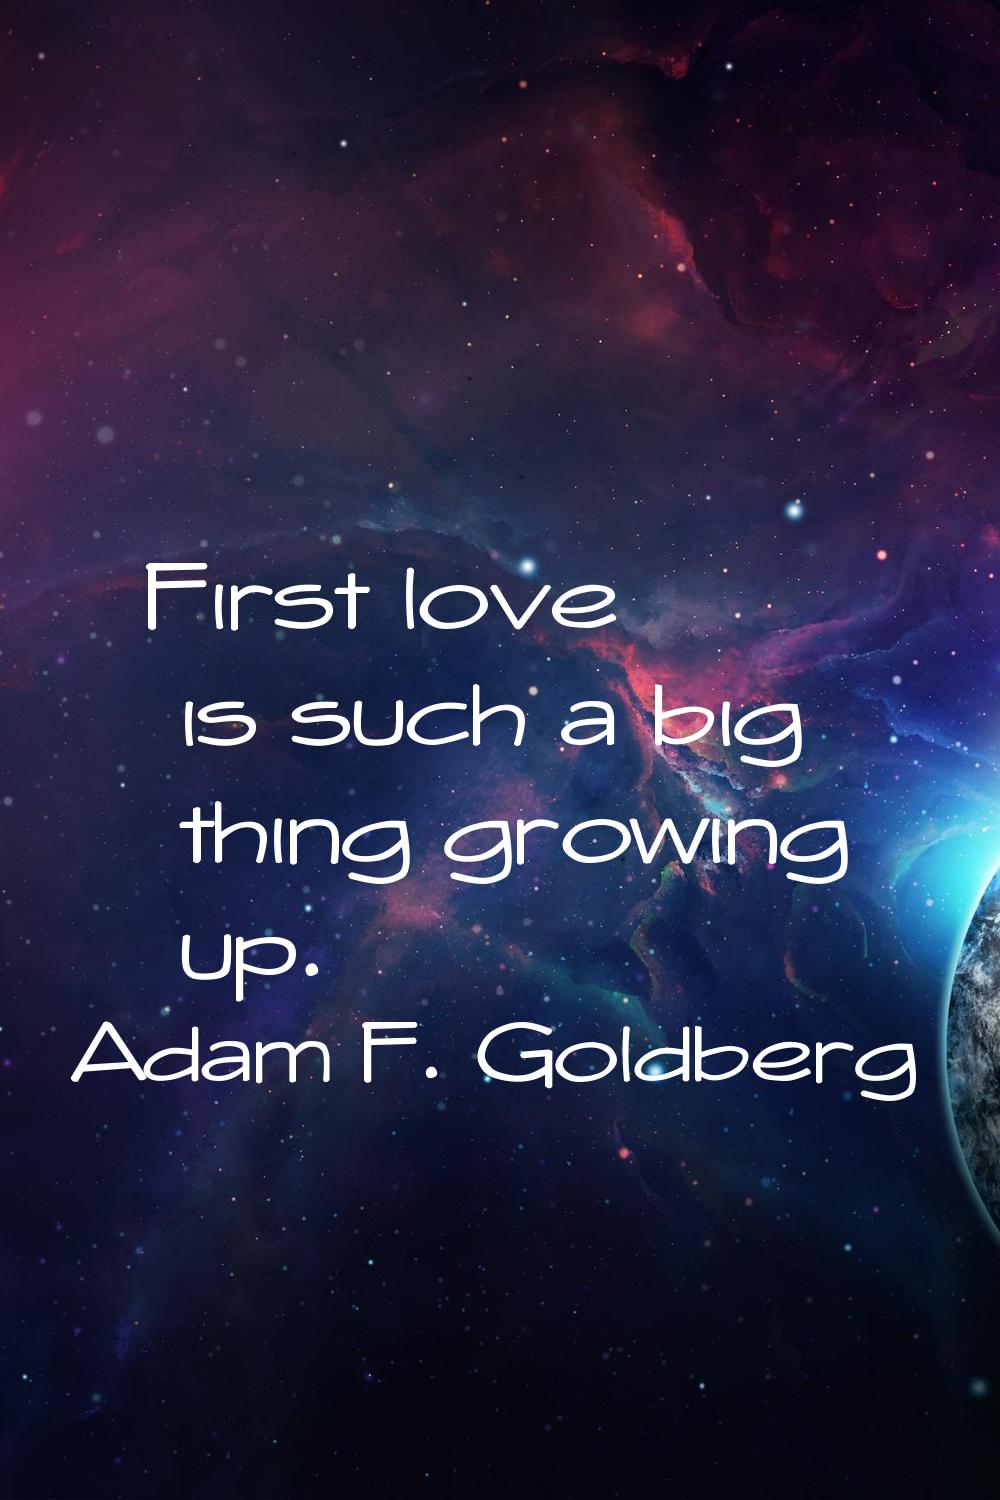 First love is such a big thing growing up.